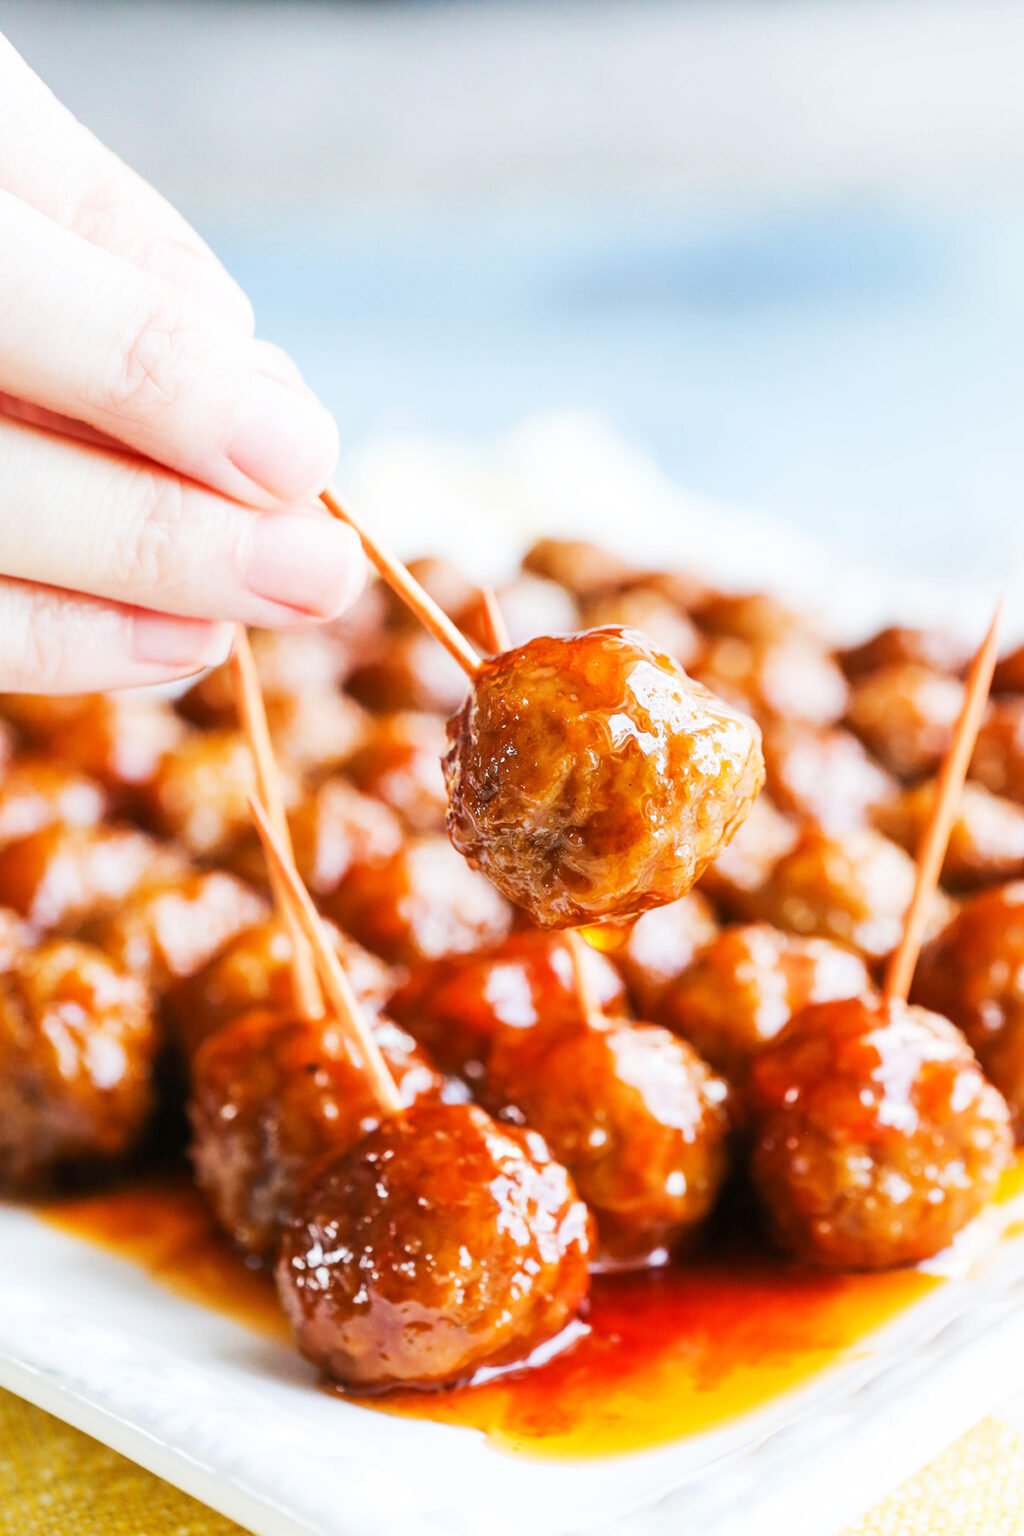 What To Serve With Meatballs At A Party - 12 great ideas! - Pip and Ebby